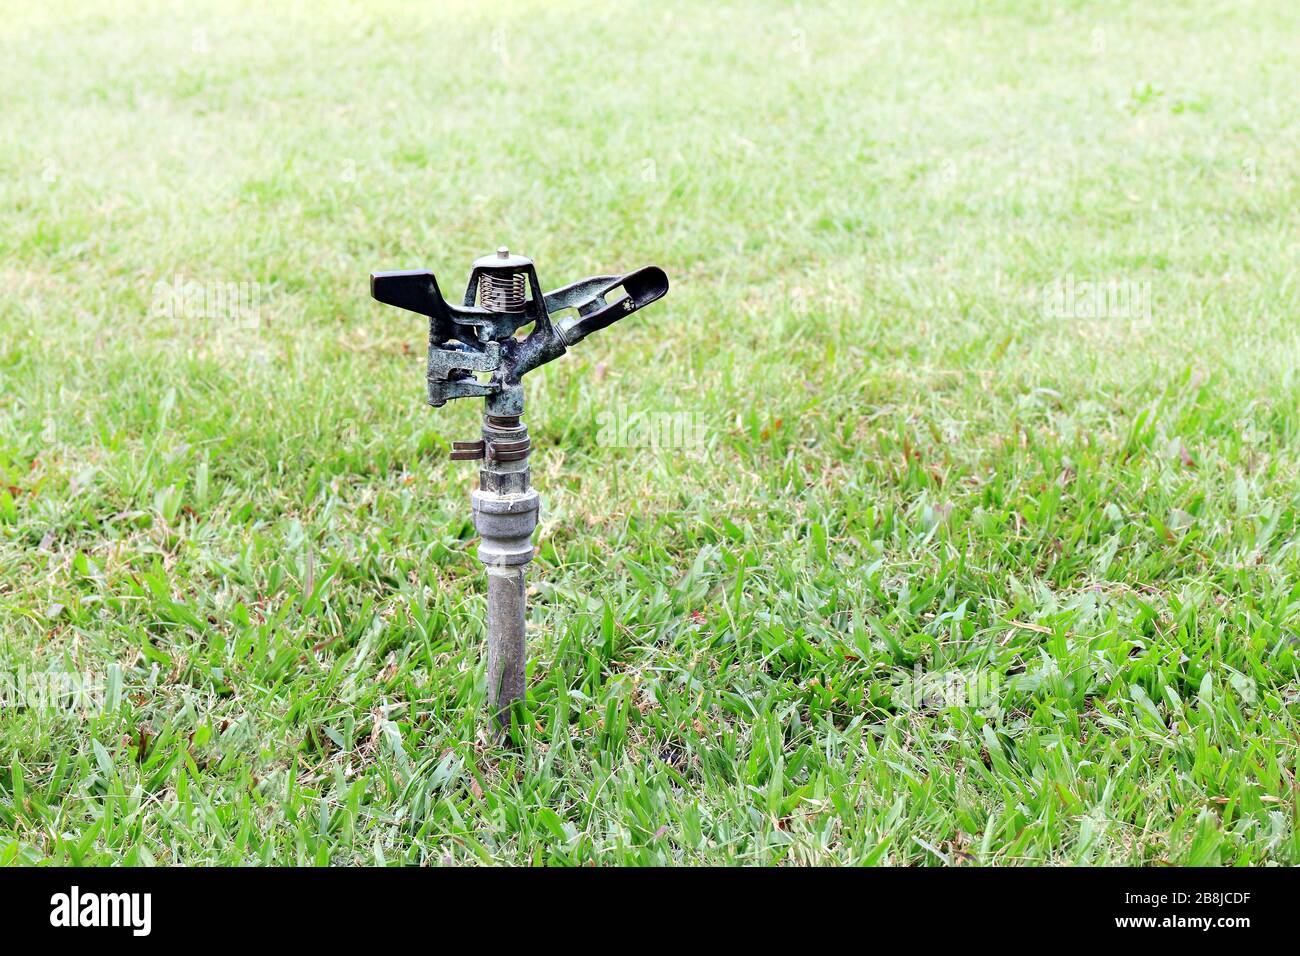 old sprinkler water automatic in garden for watering grass Stock Photo